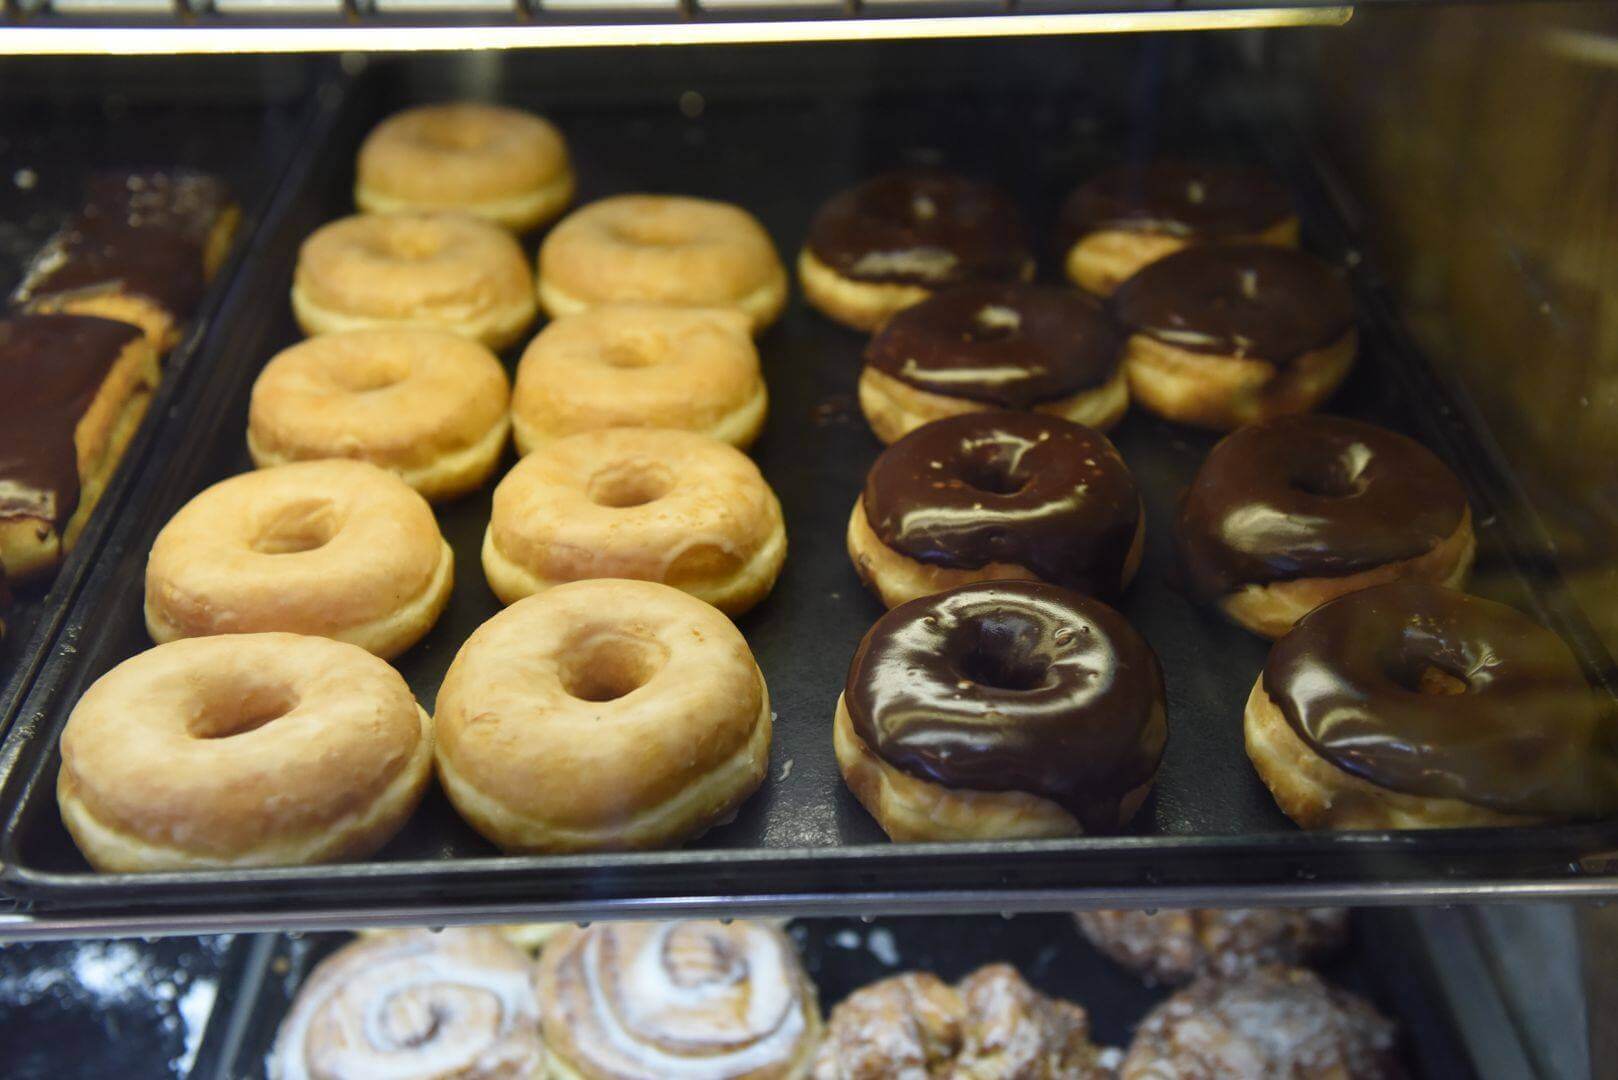 Donuts at Tasty Pastry Bakery in Tallahassee Florida. 